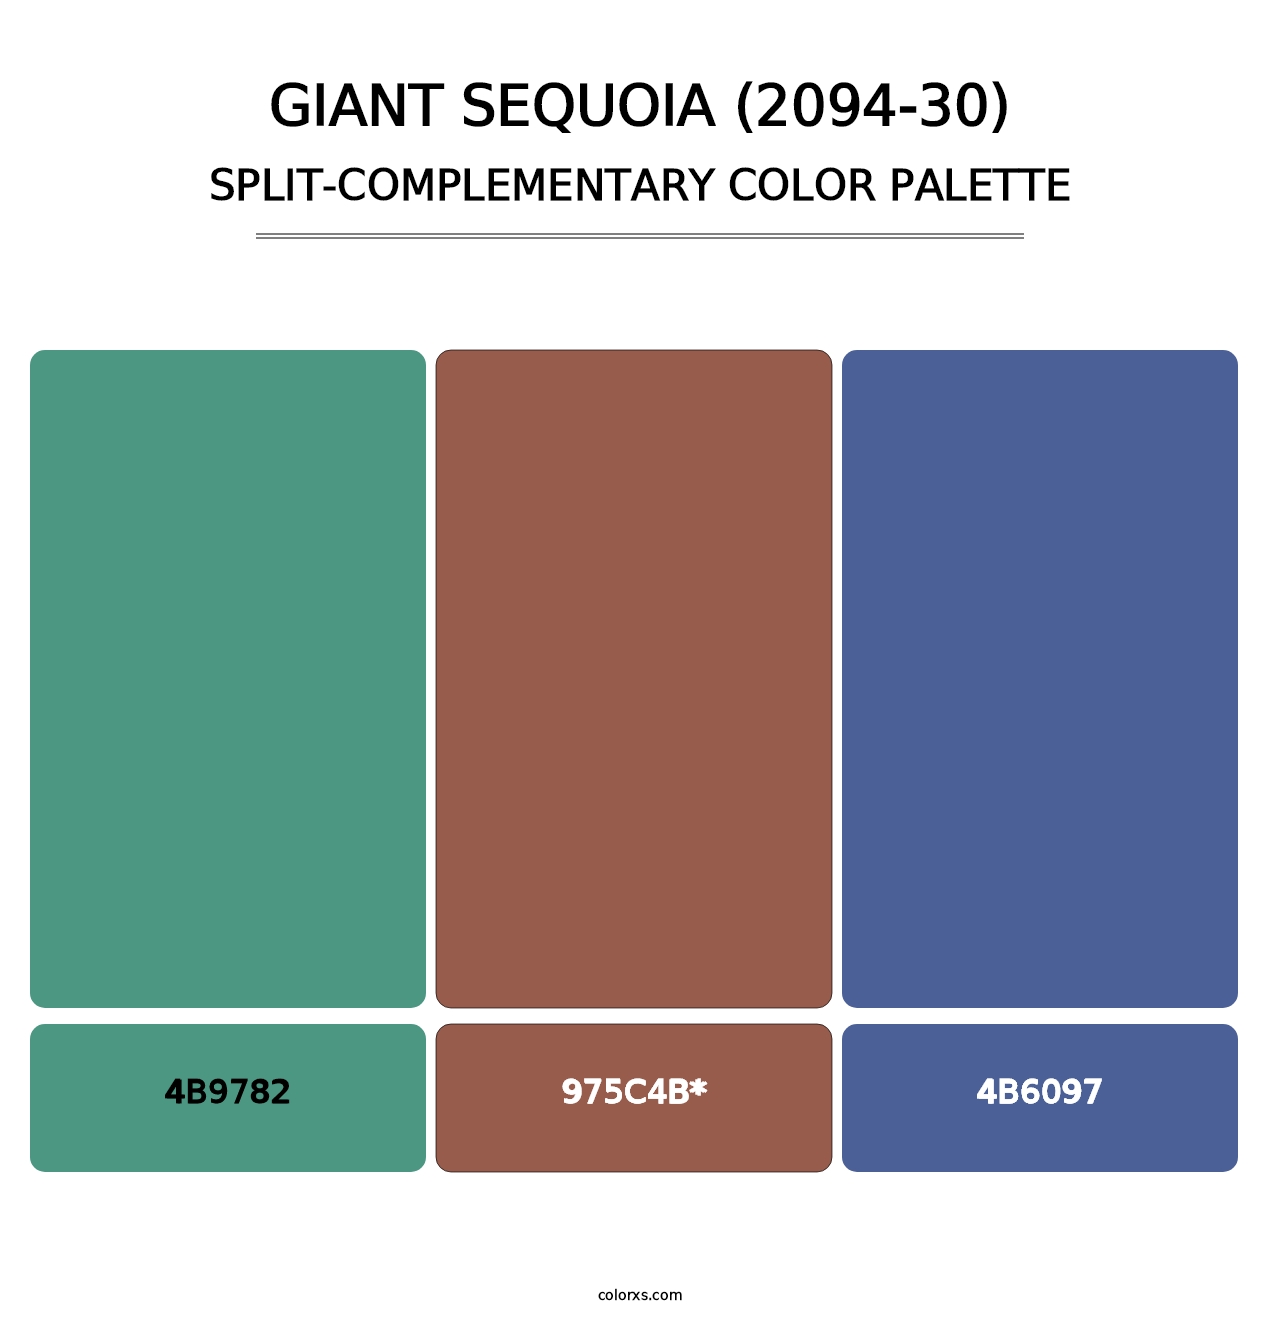 Giant Sequoia (2094-30) - Split-Complementary Color Palette